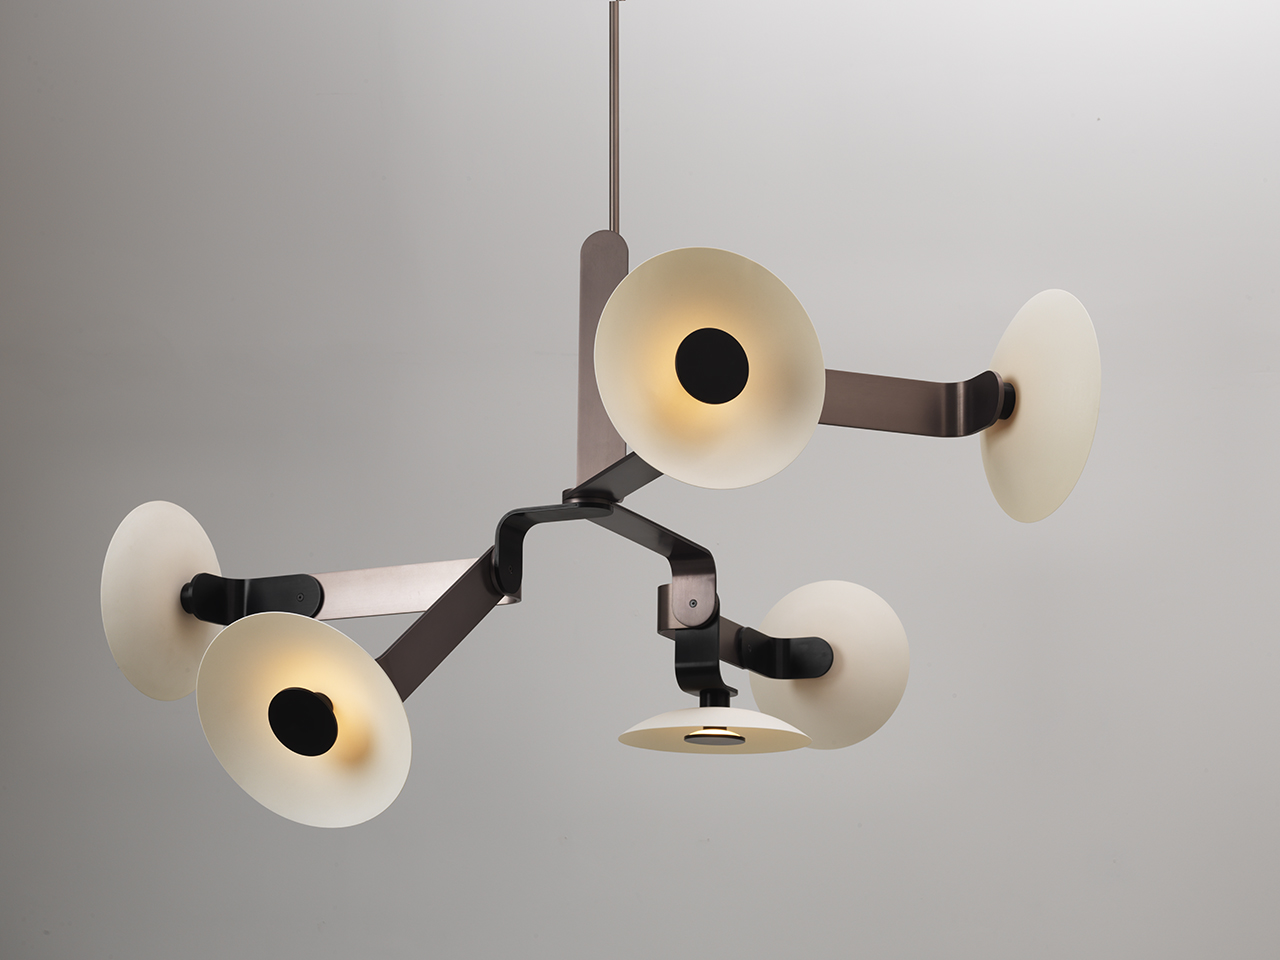 James Dieter Releases a Collection of Graphic Light Fixtures